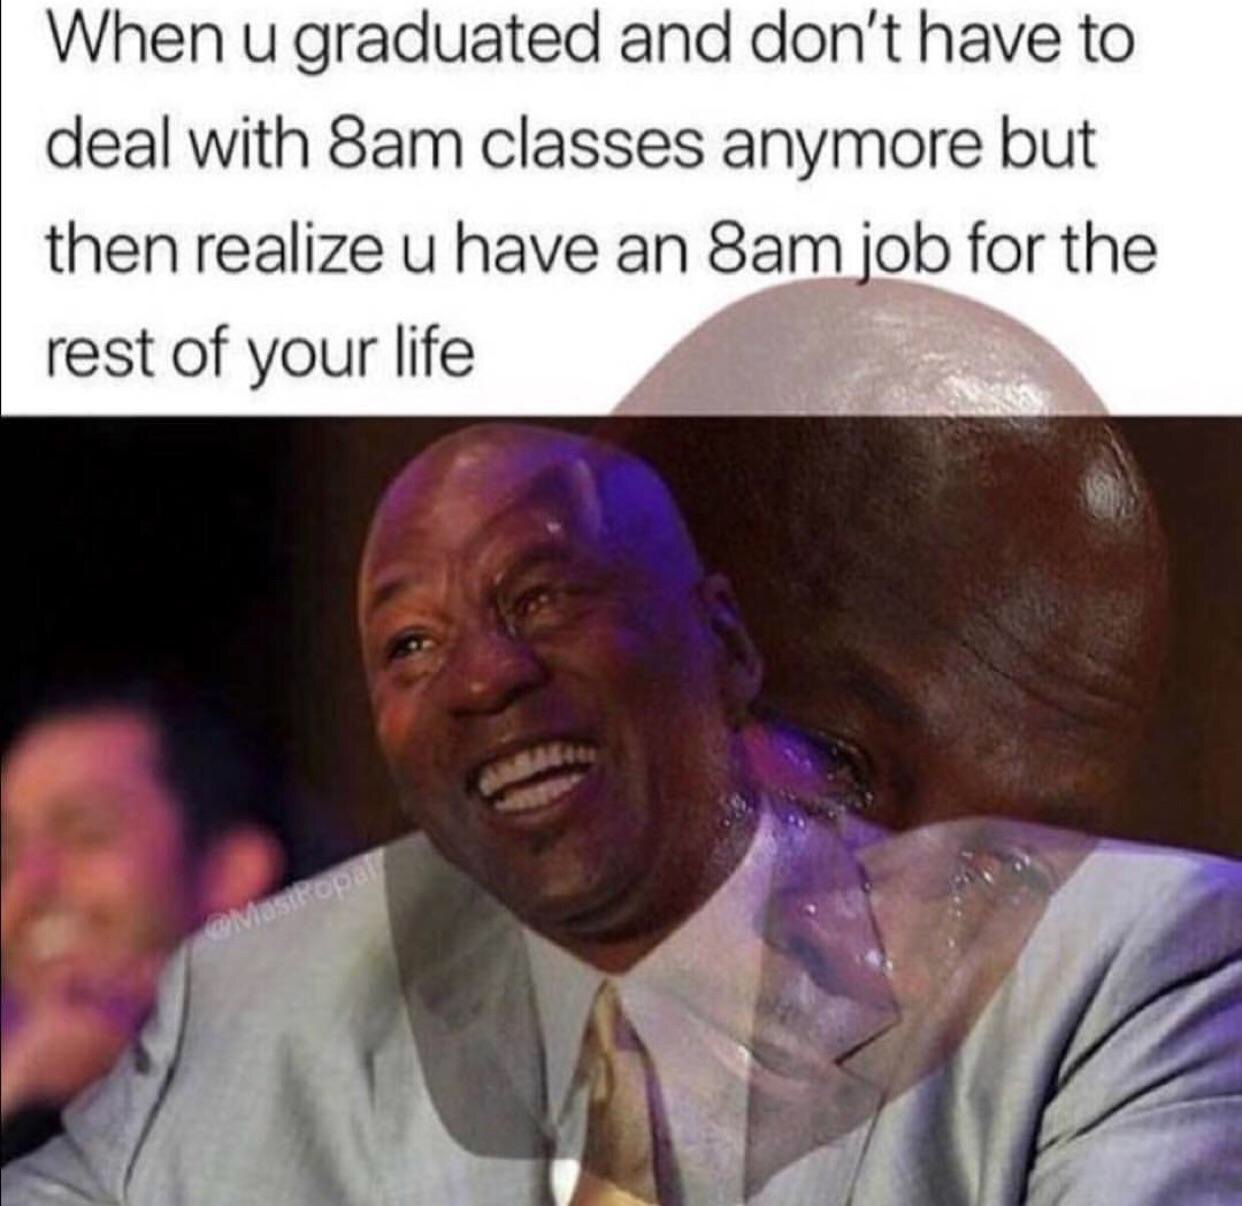 graduated memes - When u graduated and don't have to deal with Sam classes anymore but then realize u have an 8am job for the rest of your life